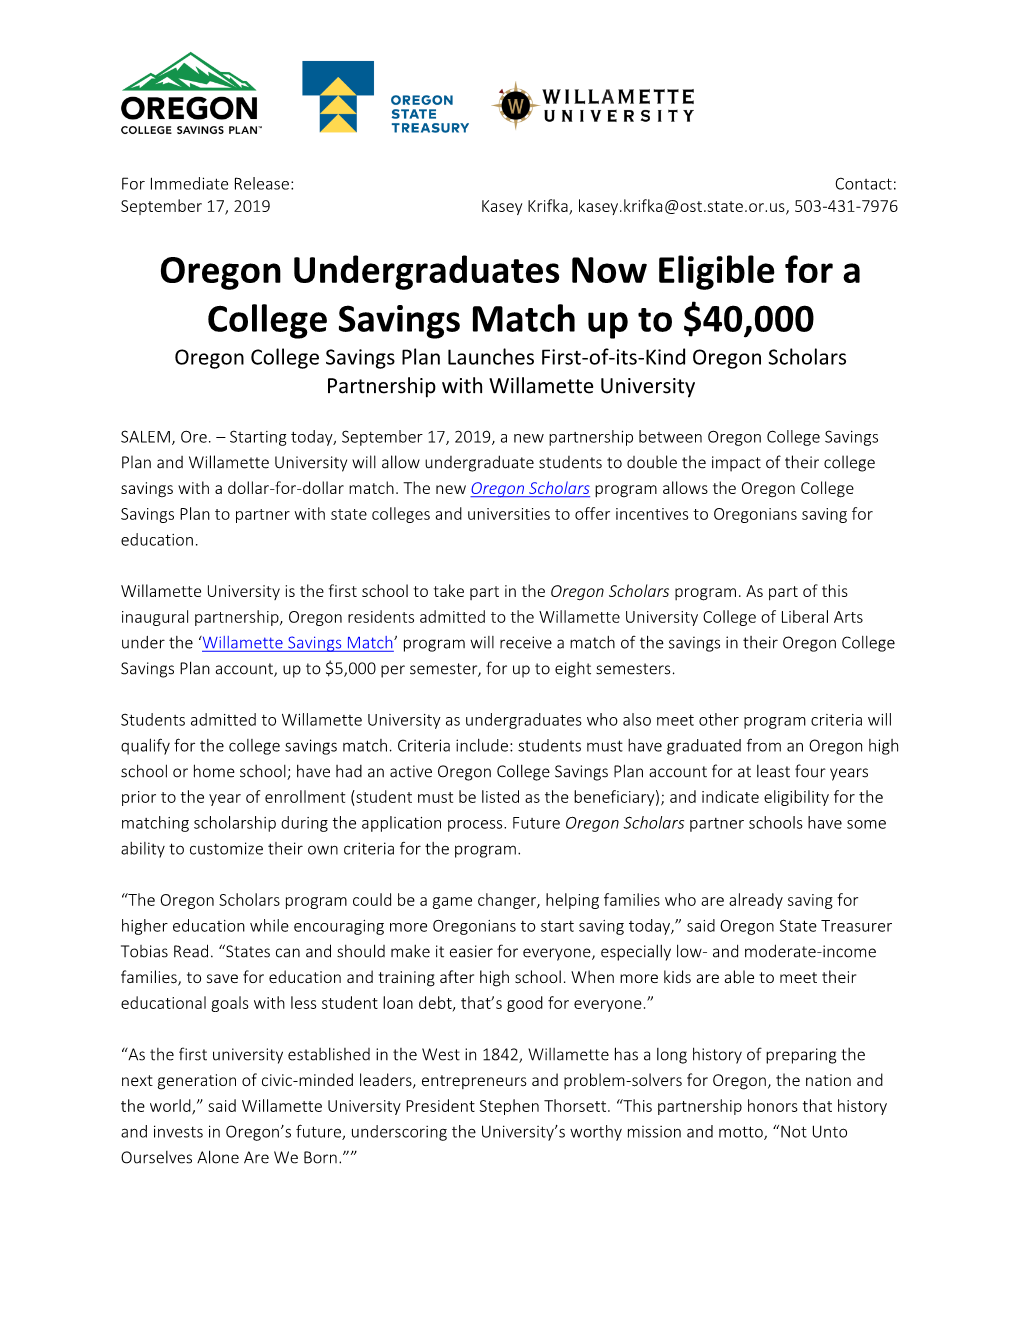 Oregon Undergraduates Now Eligible for a College Savings Match up To